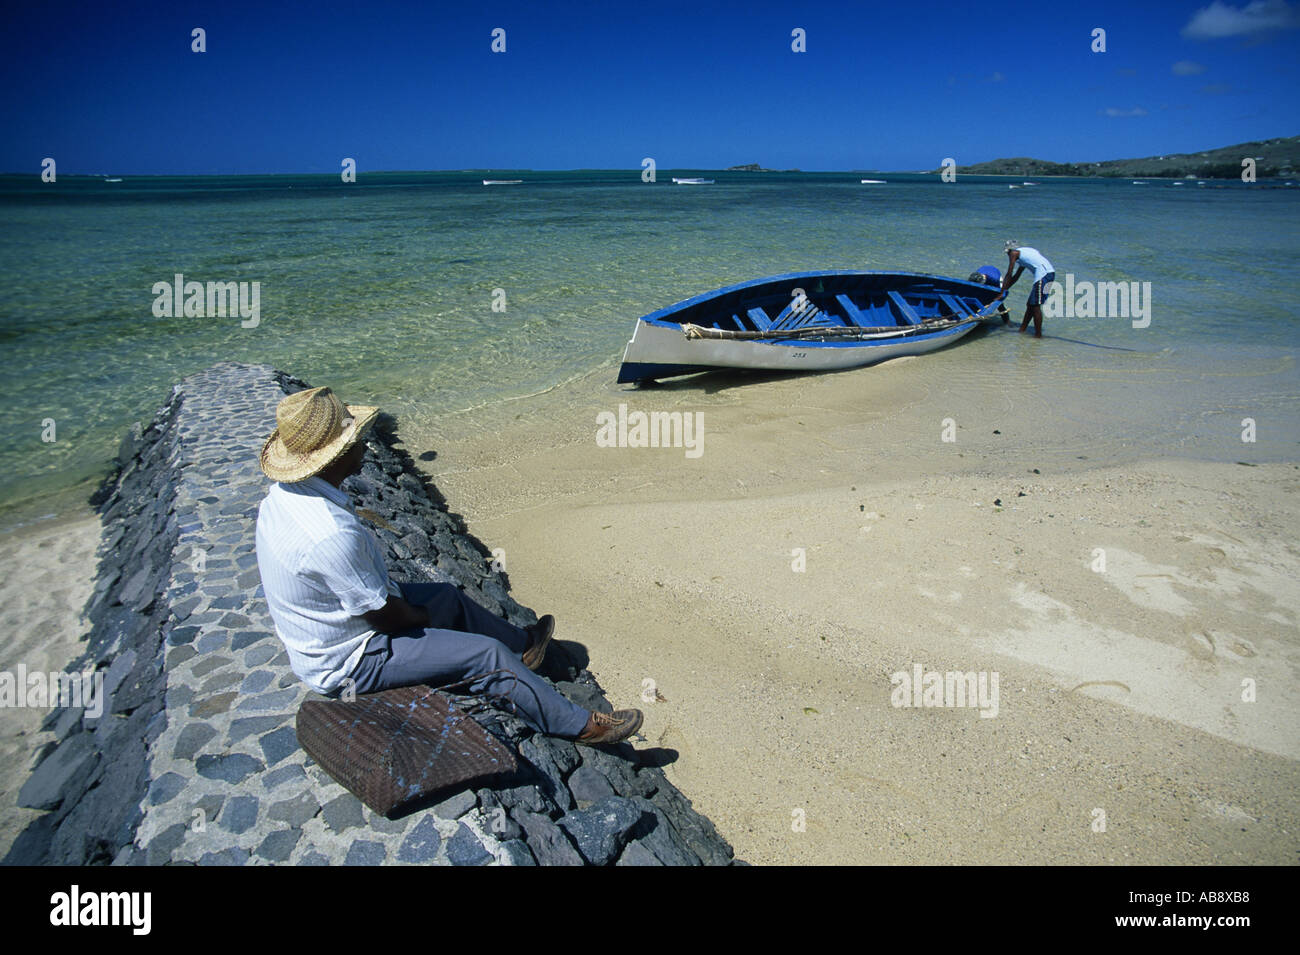 three men at a tropical beach, one sitting on a breakwater with a bag, the others launching a boat, Mauritius, Rodrigues. Stock Photo